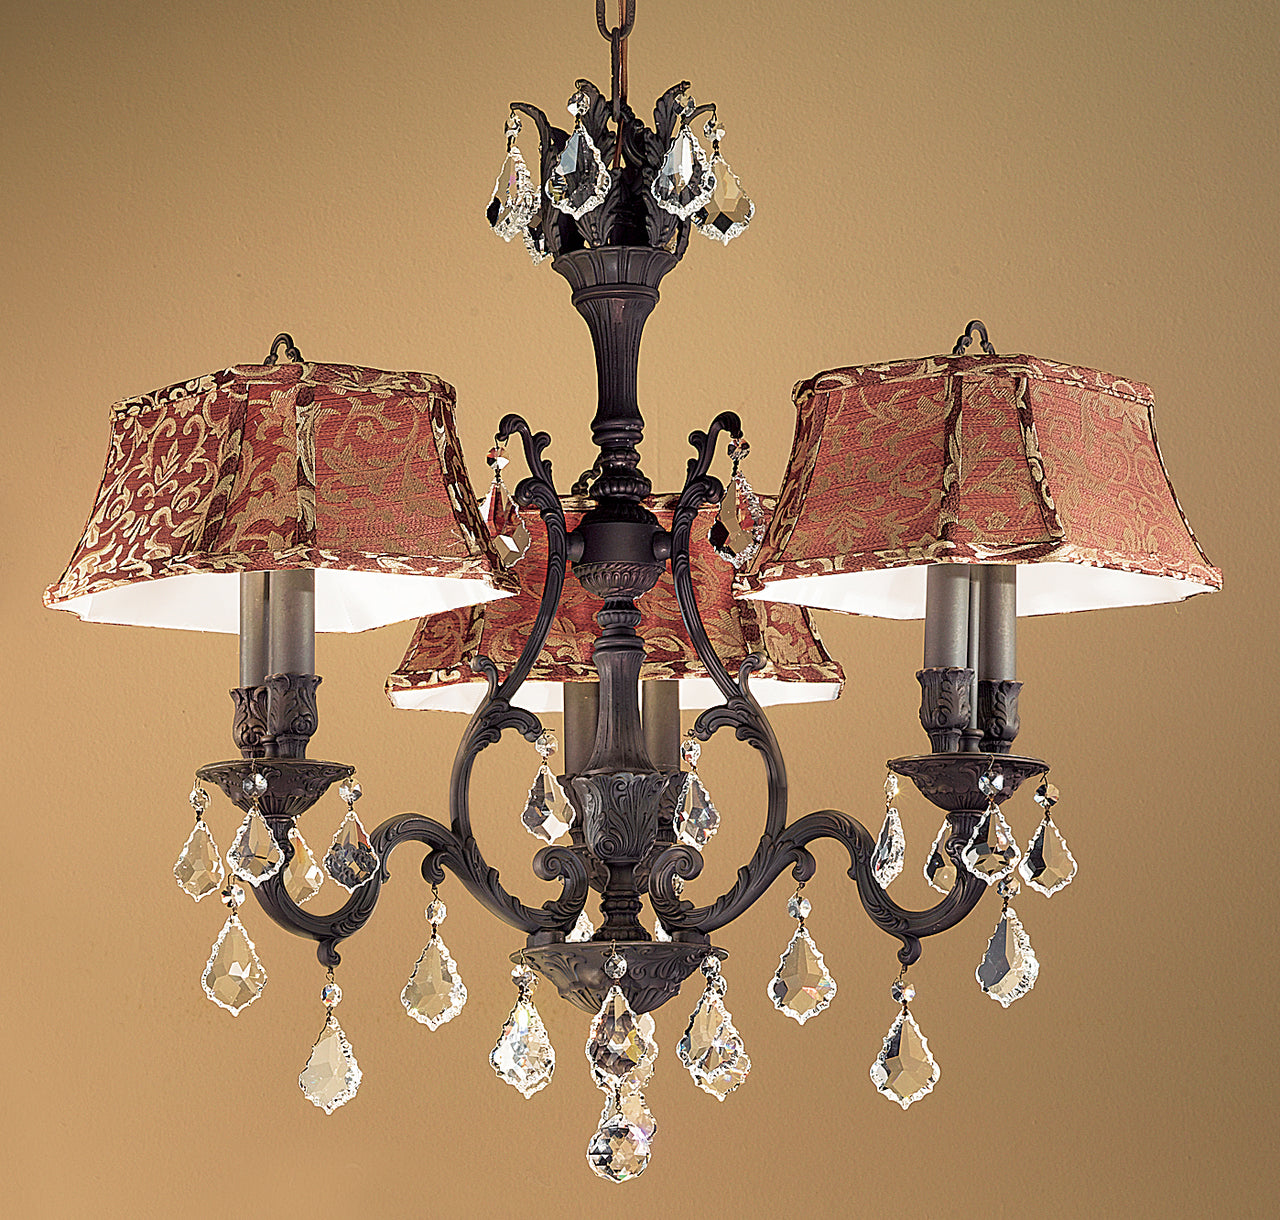 Classic Lighting 57363 FG S Majestic Crystal Chandelier in French Gold (Imported from Spain)